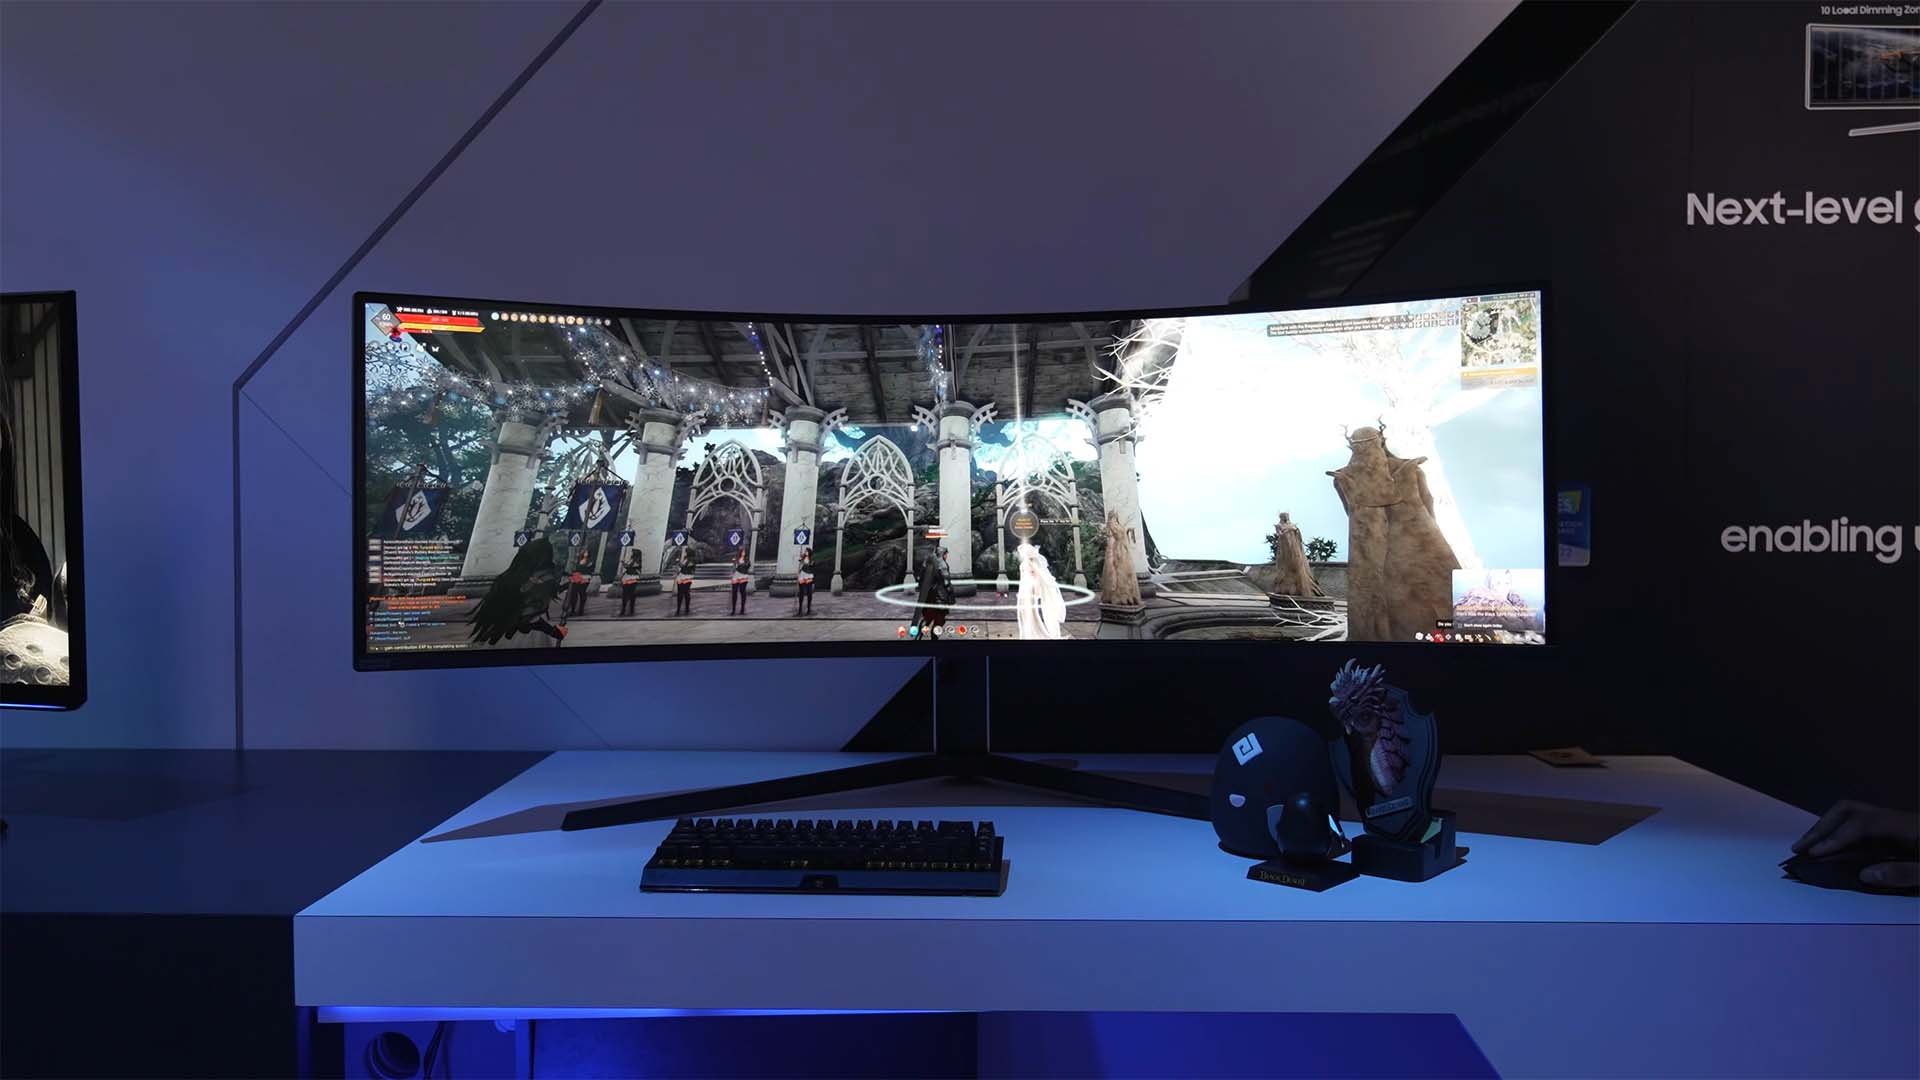 We go hands-on with Samsung's first mini-LED gaming monitor at CES 2022